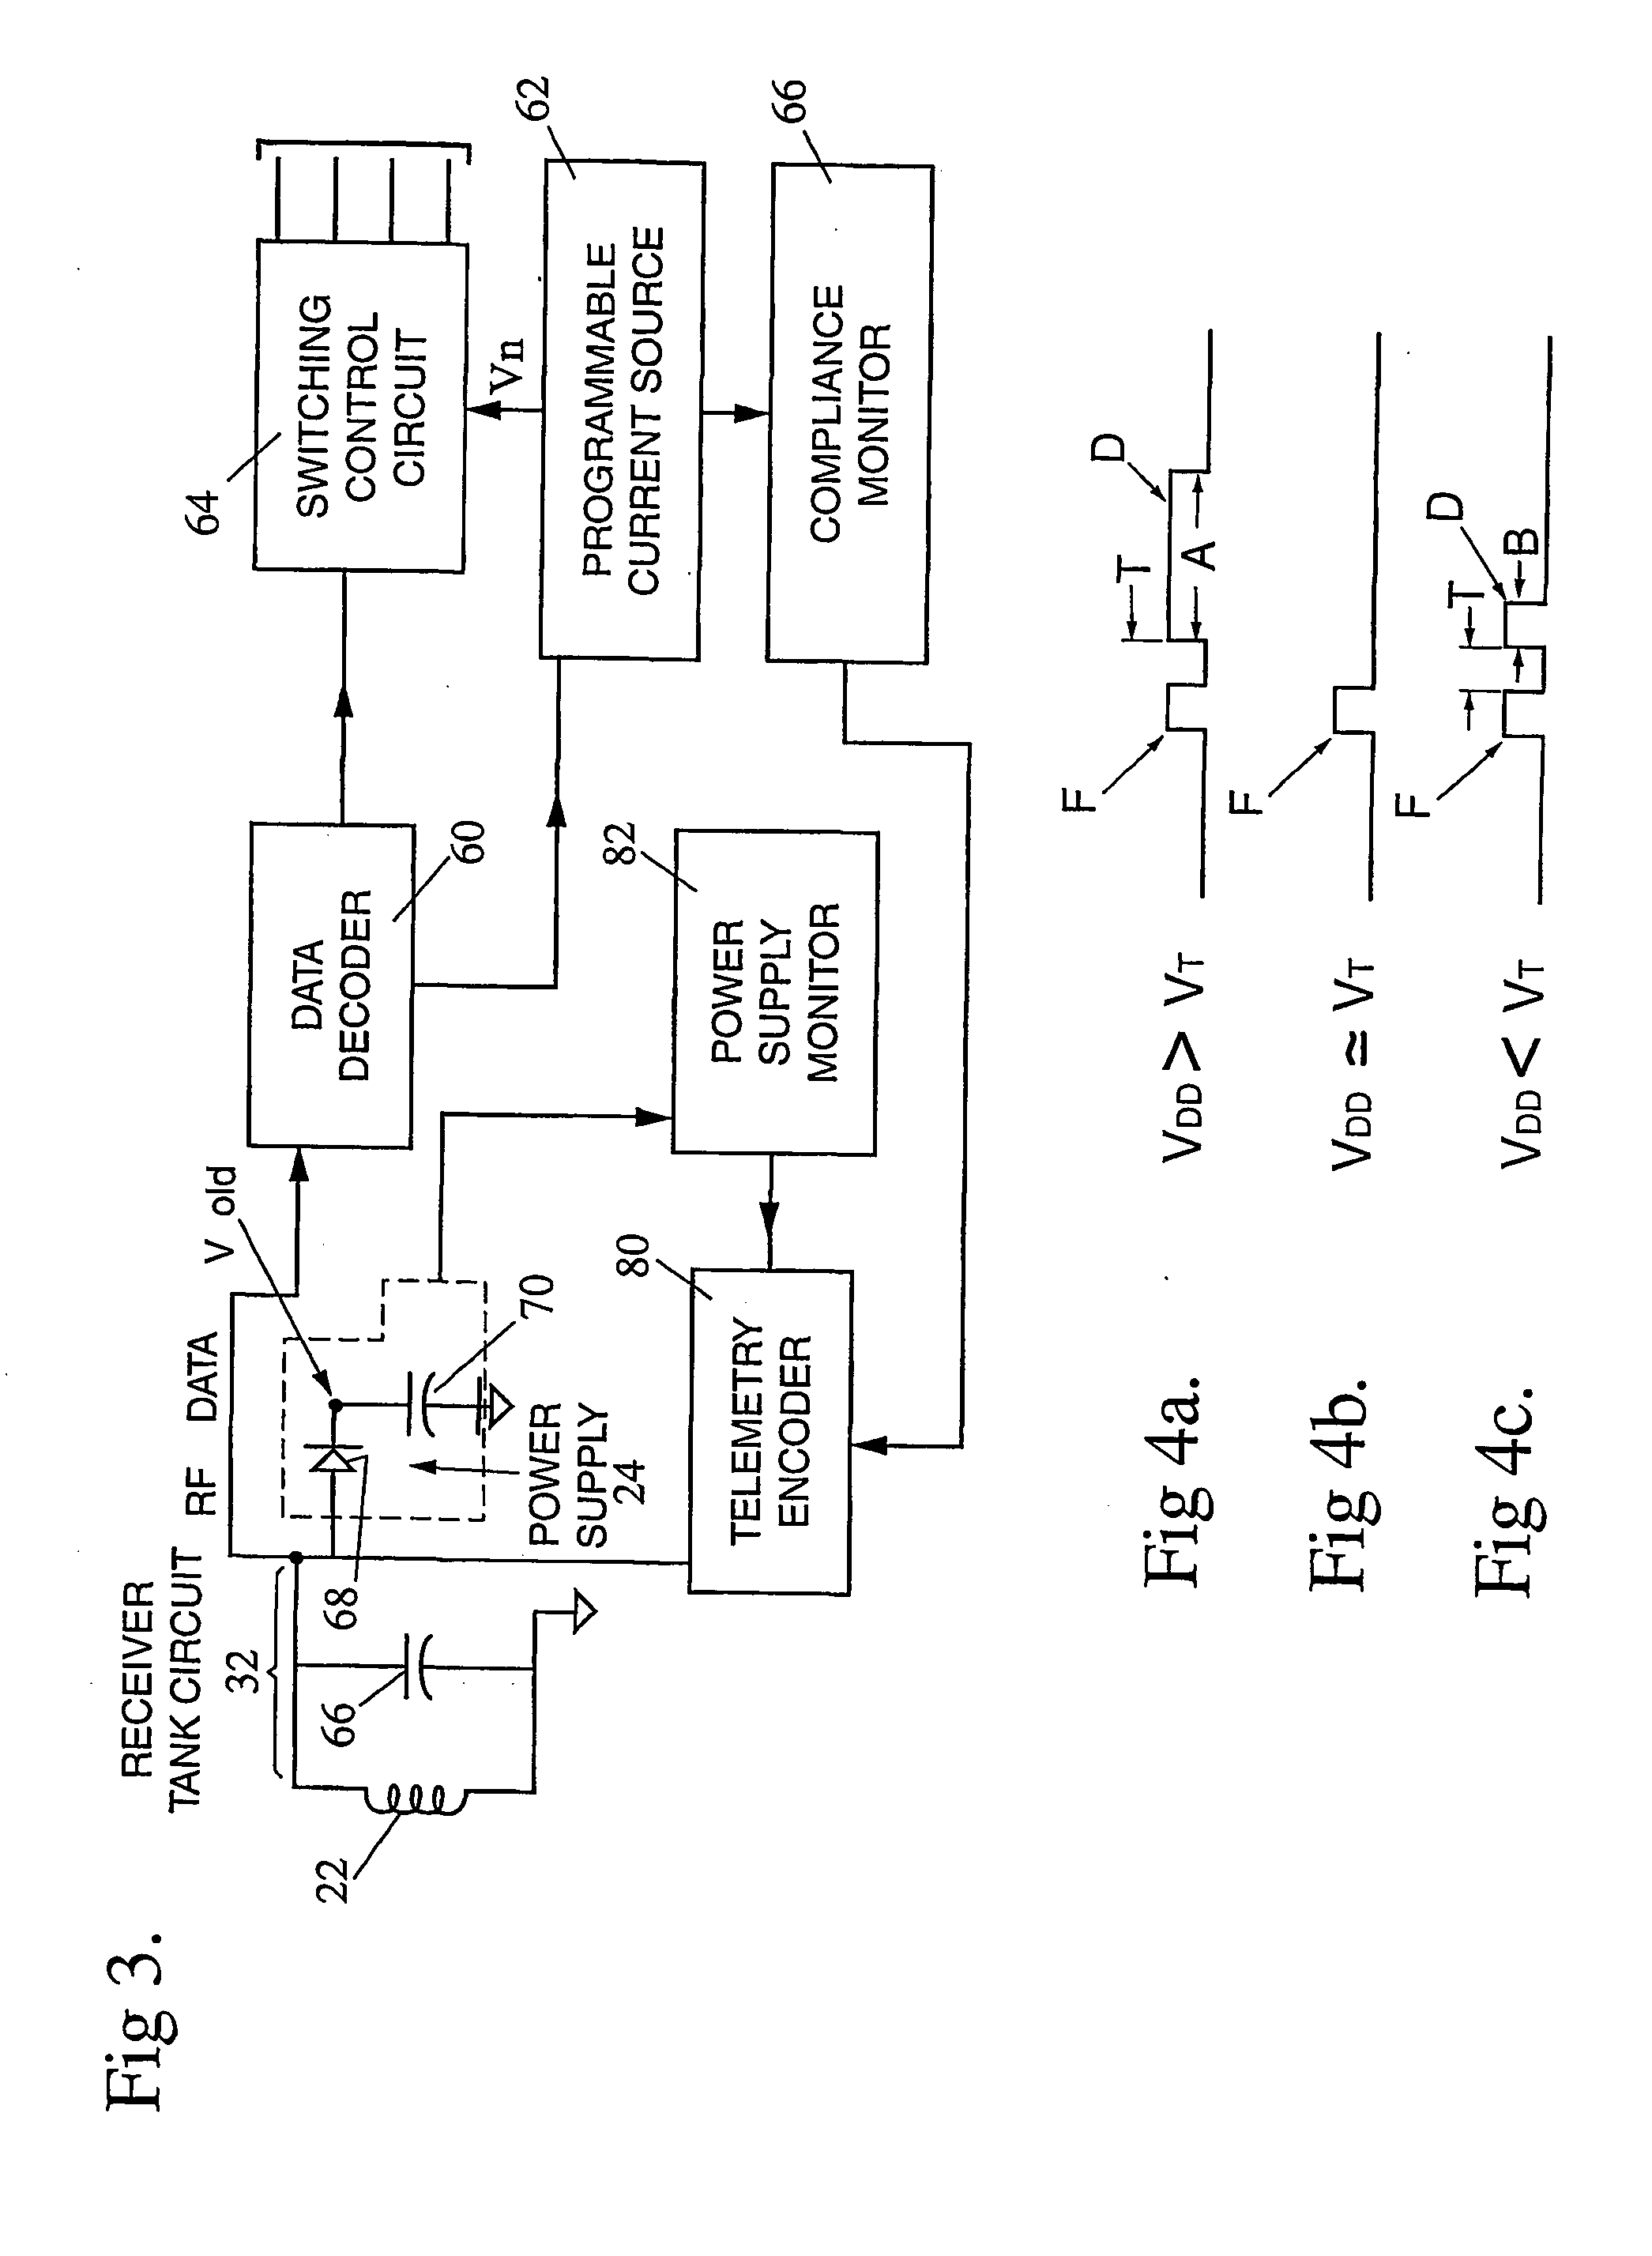 Transcutaneous power optimization circuit for a medical implant